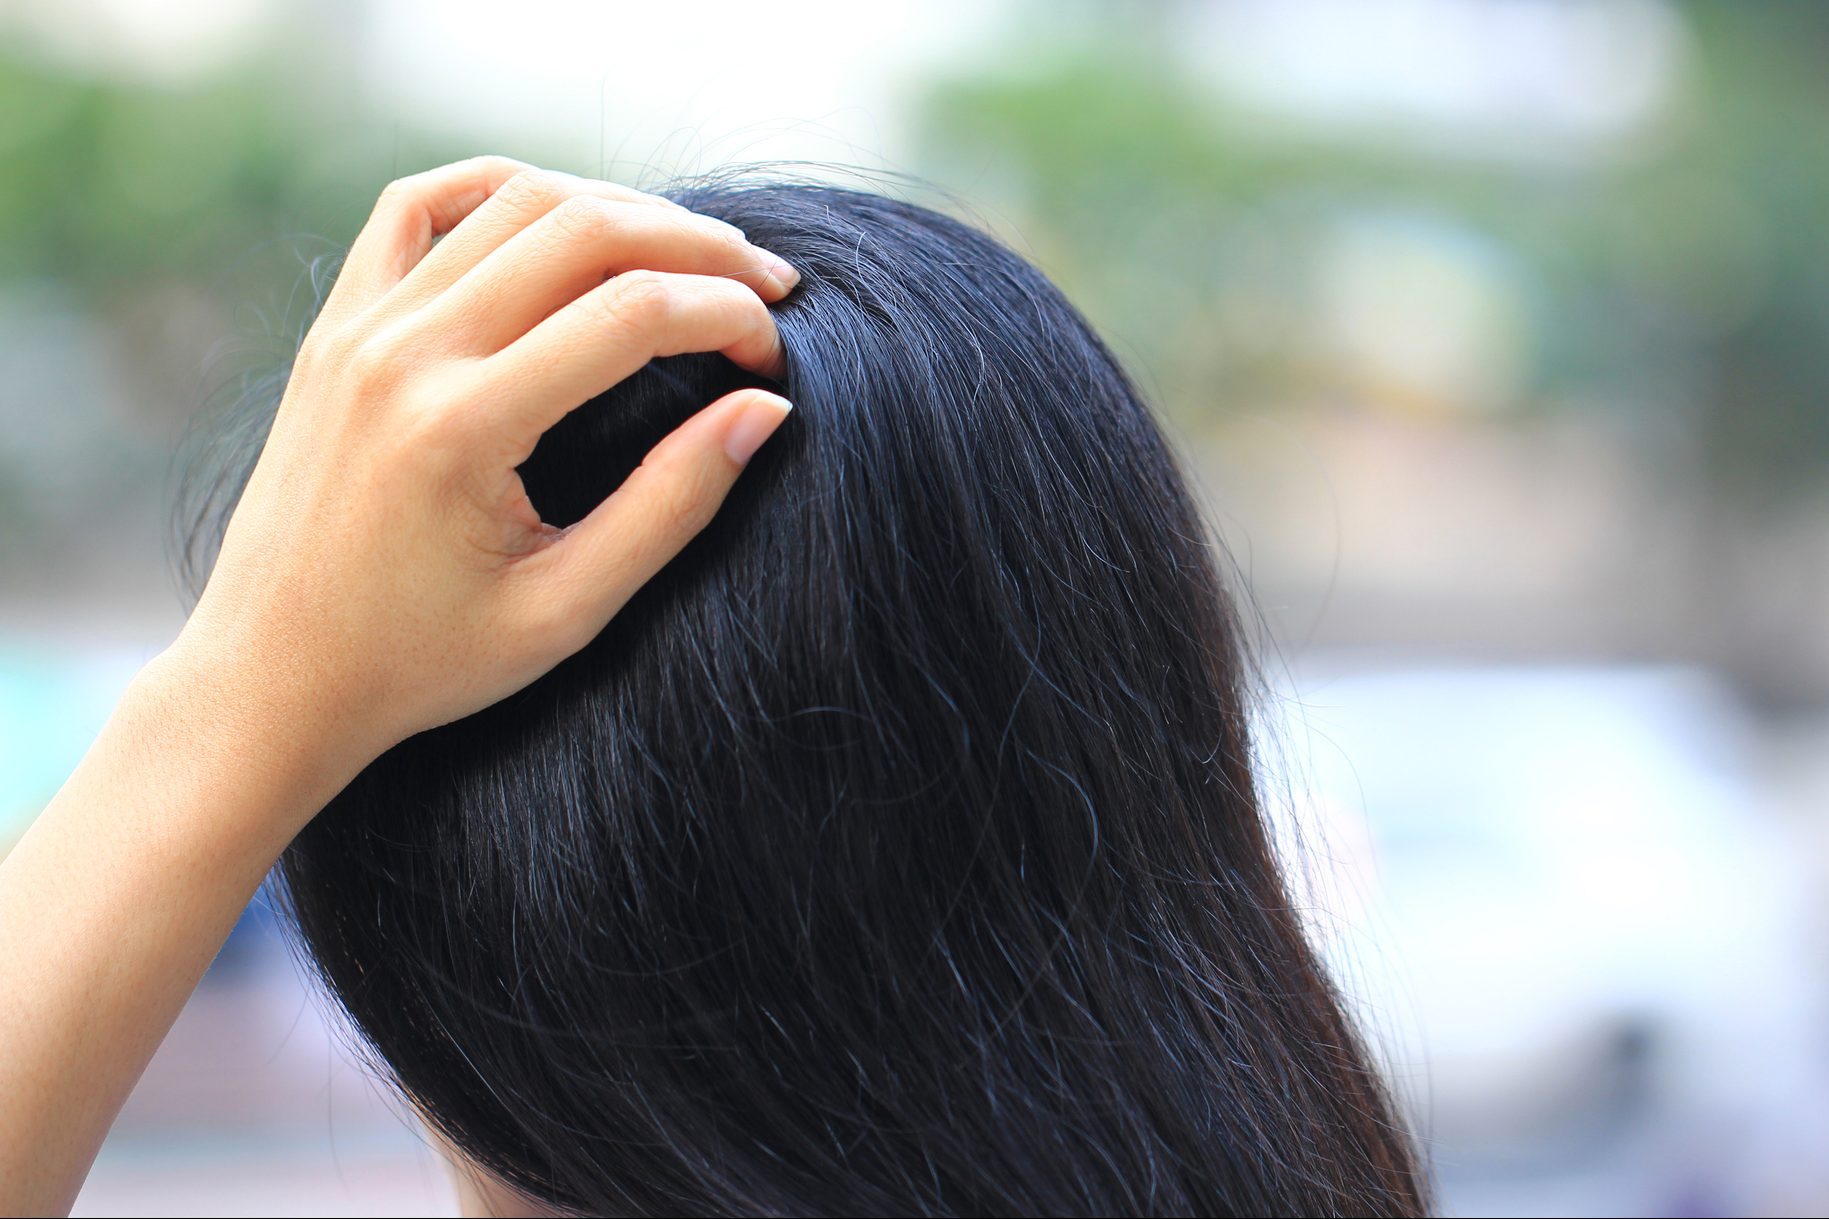 Is It Scalp Psoriasis or Dandruff? Here’s How to Tell the Difference